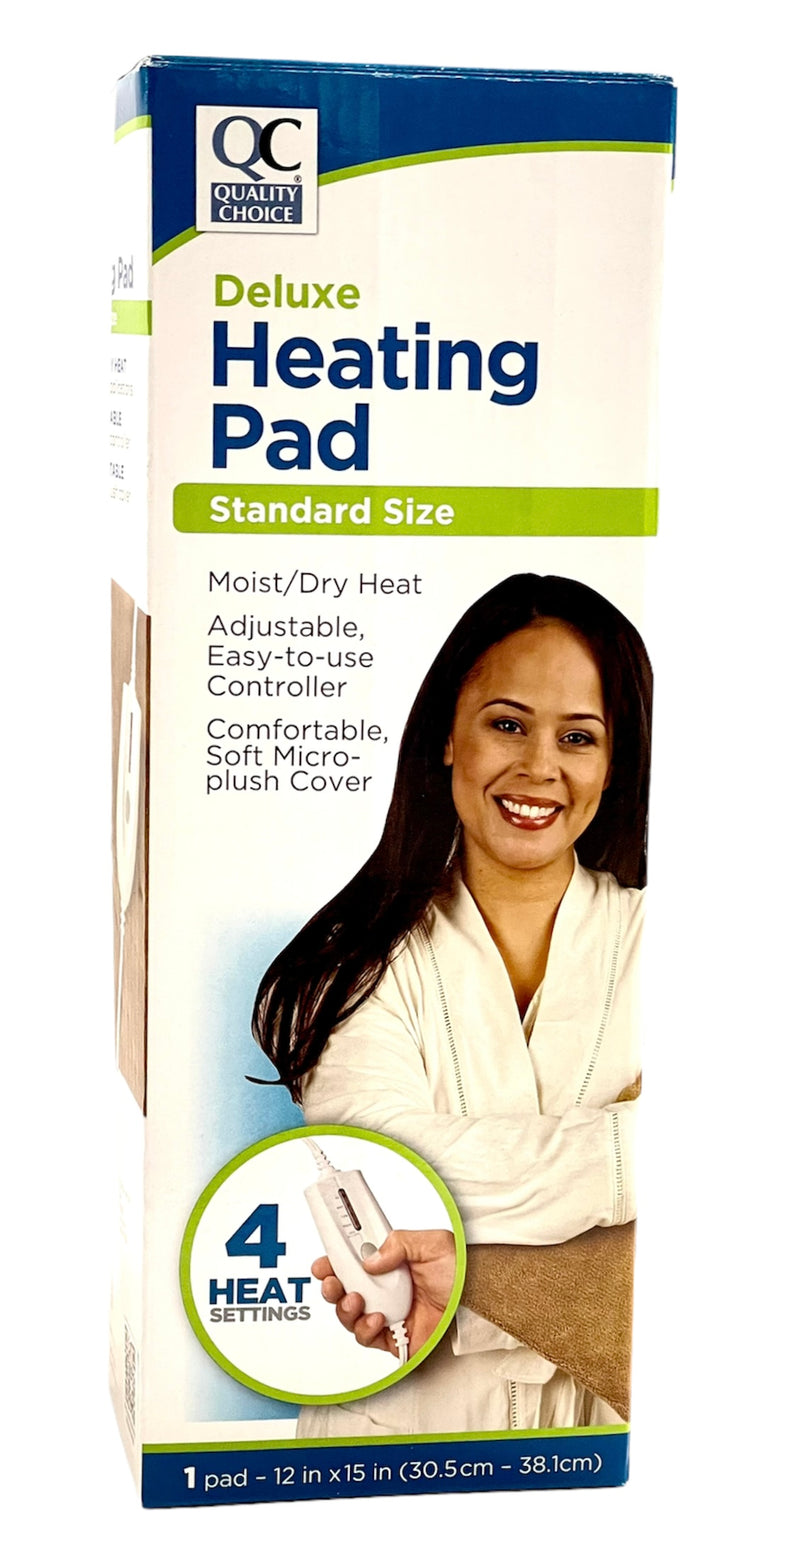 Deluxe Heating Pad | Standard Size | 4 Heat Settings | 1 Pad